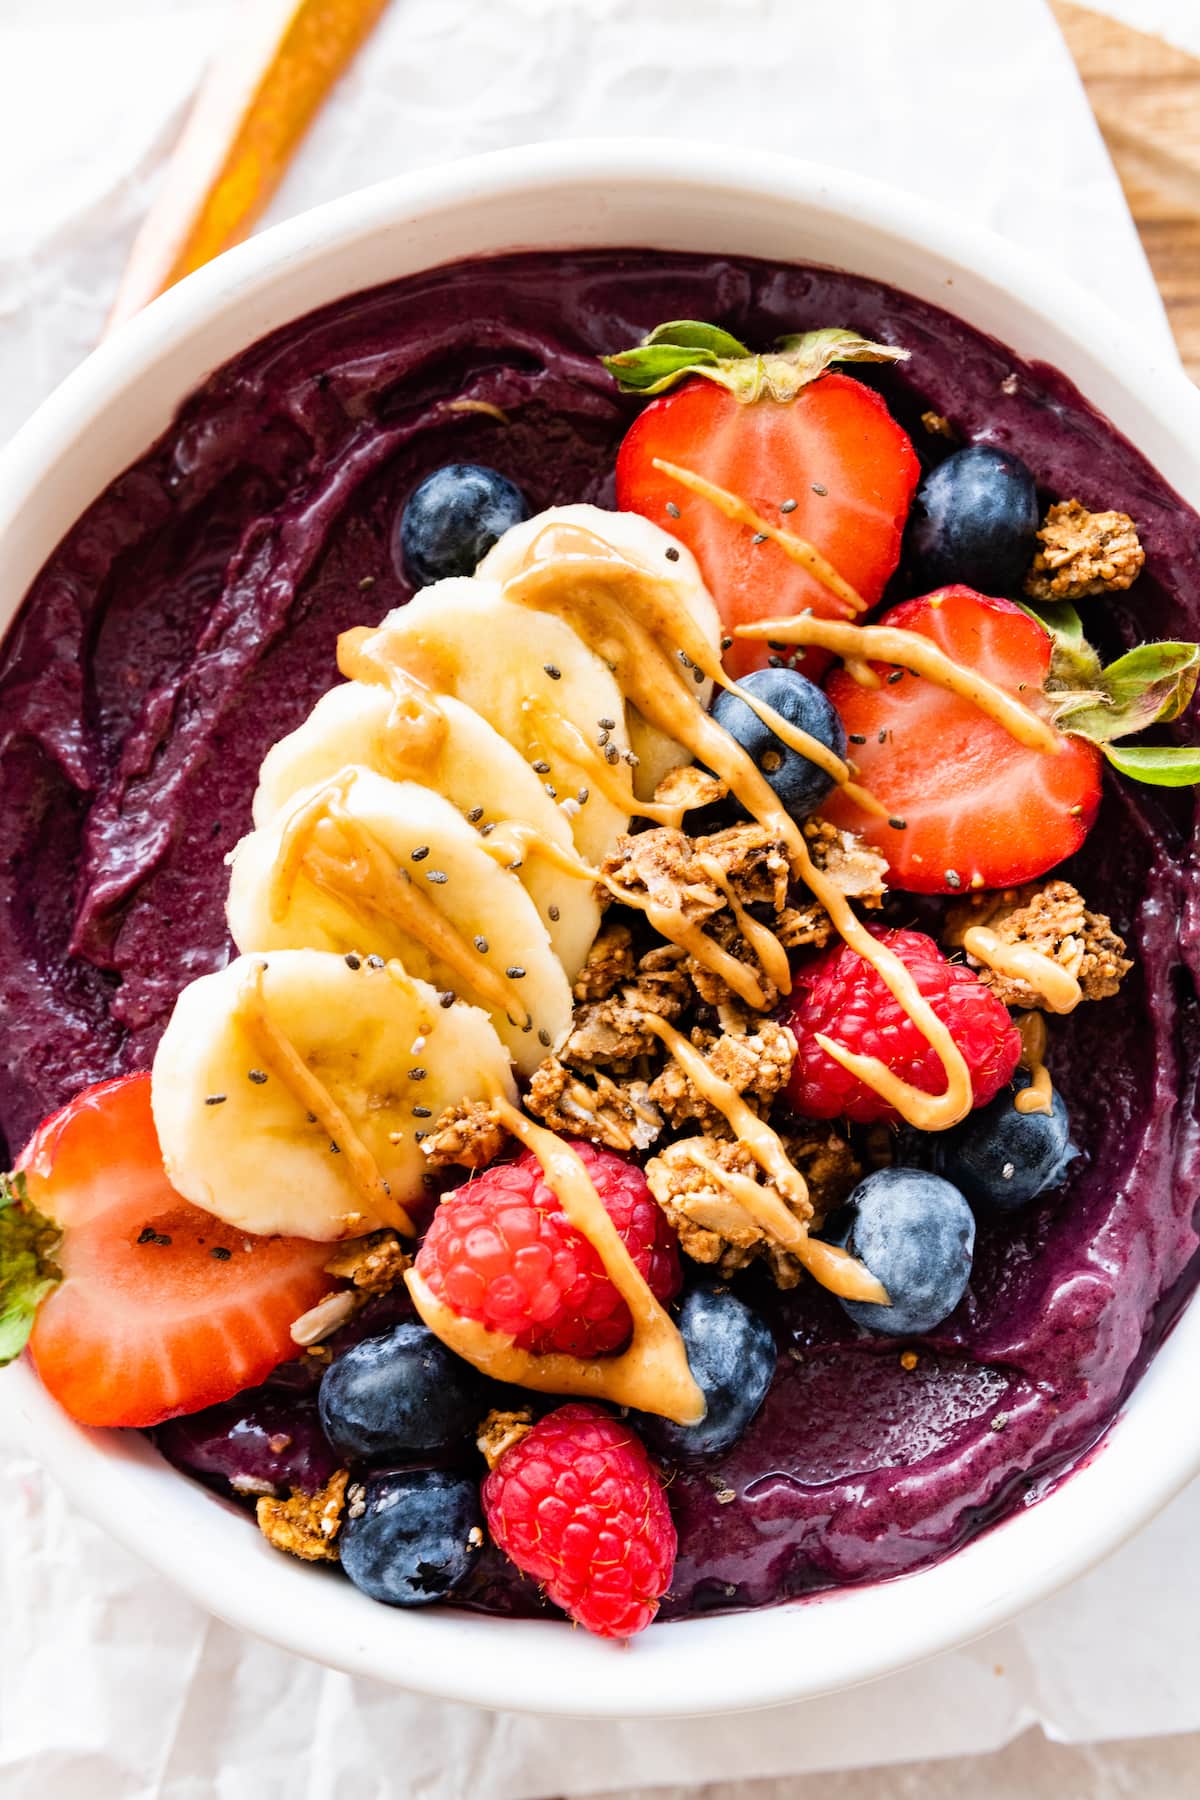 An acai bowl topped with fresh berries, sliced banana, granola, and a drizzle of nut butter.